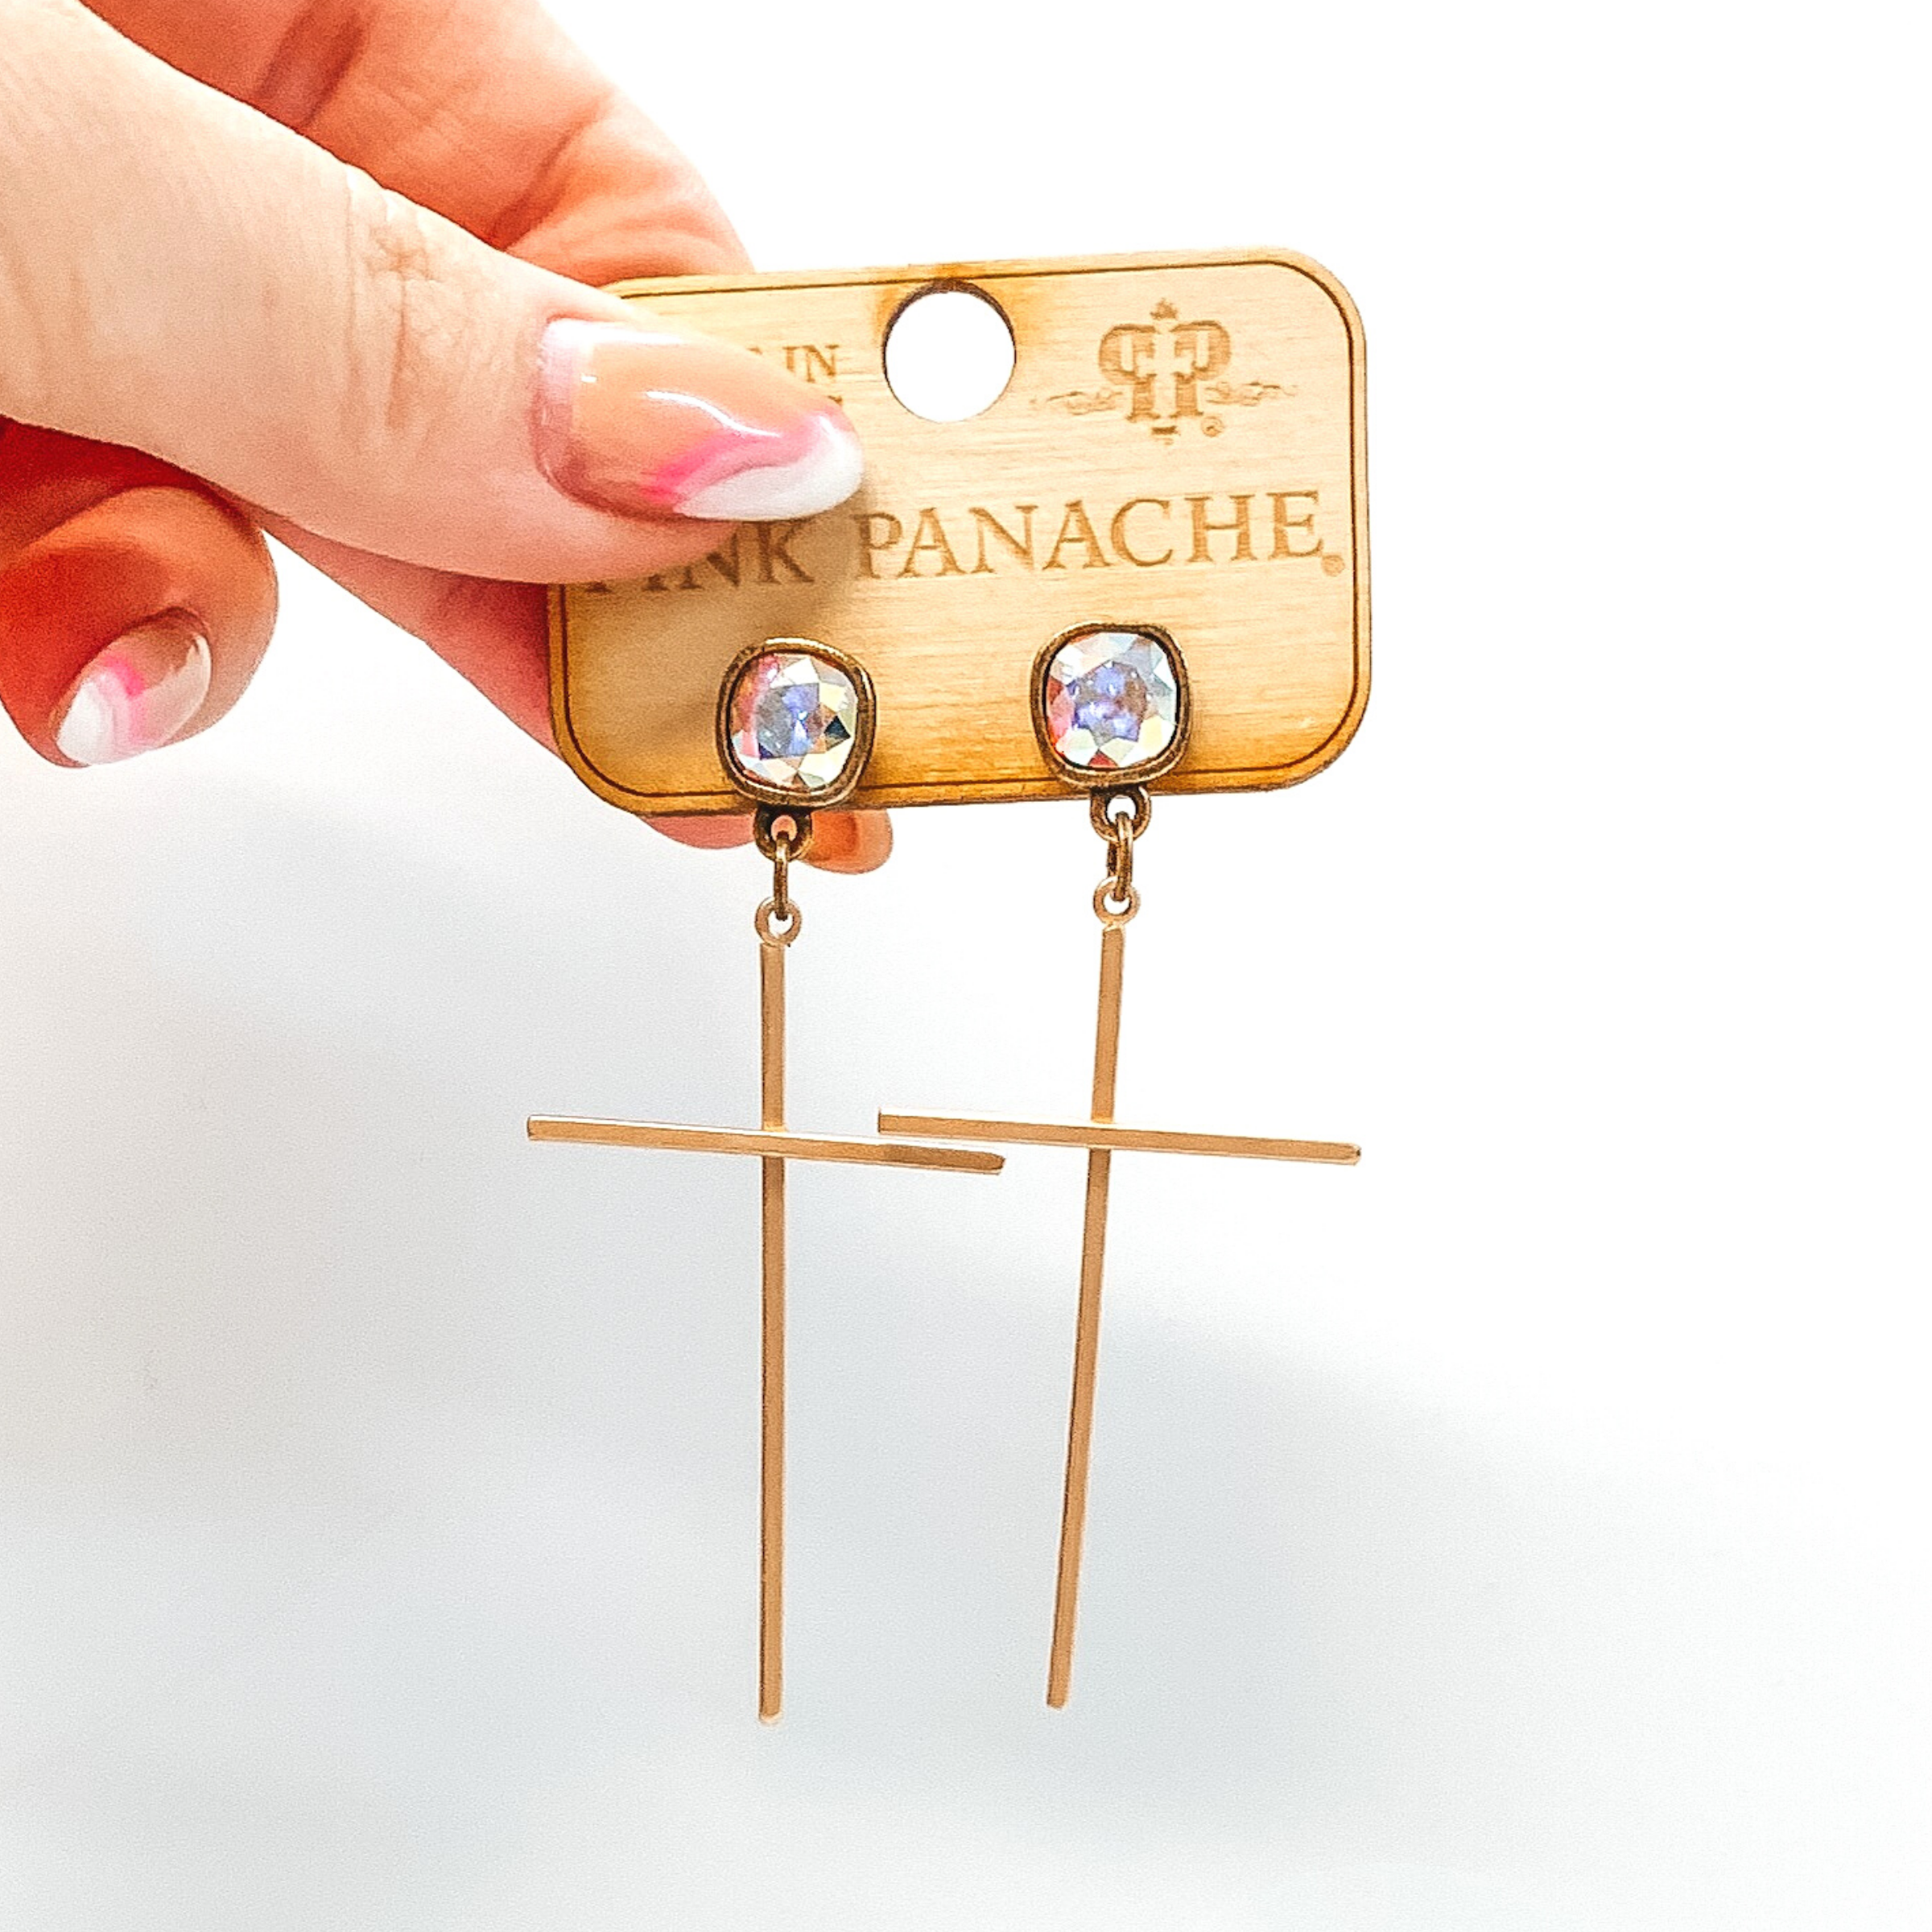 Ab cushion cut crystal stud earrings with a hanging gold, thin cross pendant. These earrings are pictured on a white background and is held up by a hand. 